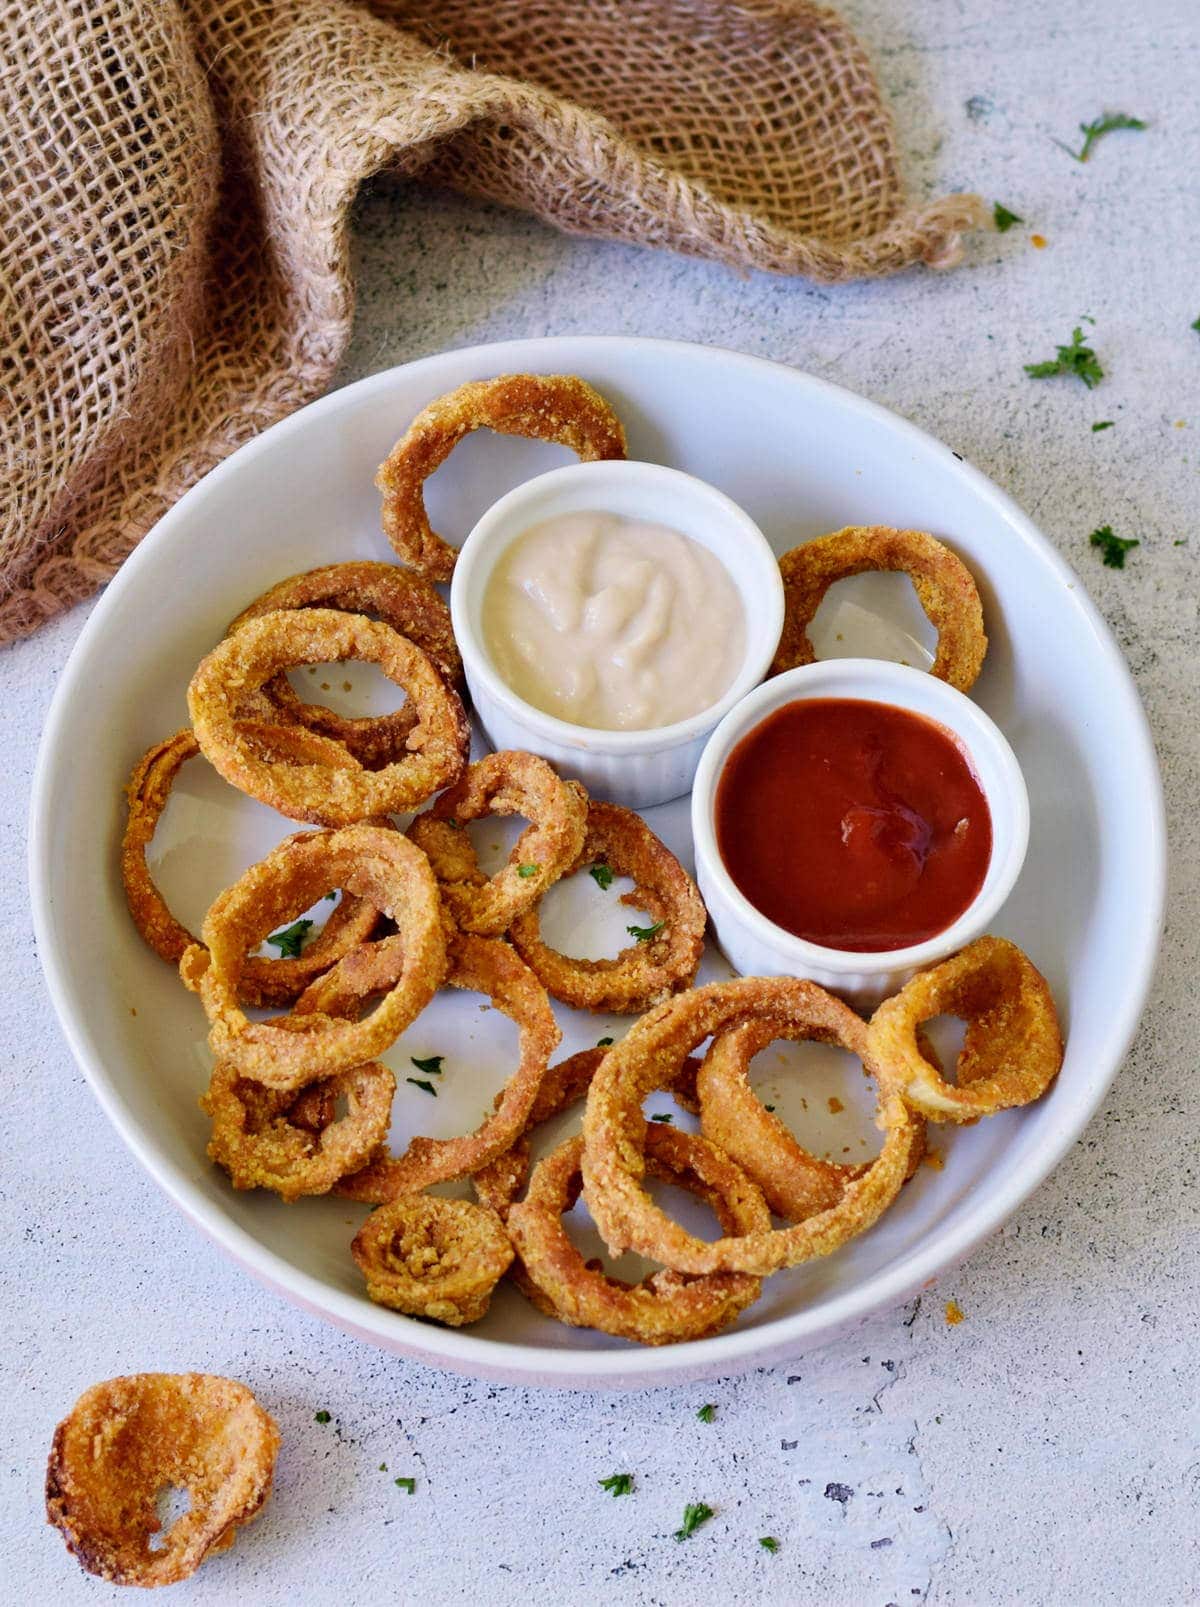 baked chips of onions in bowl with red and white dip